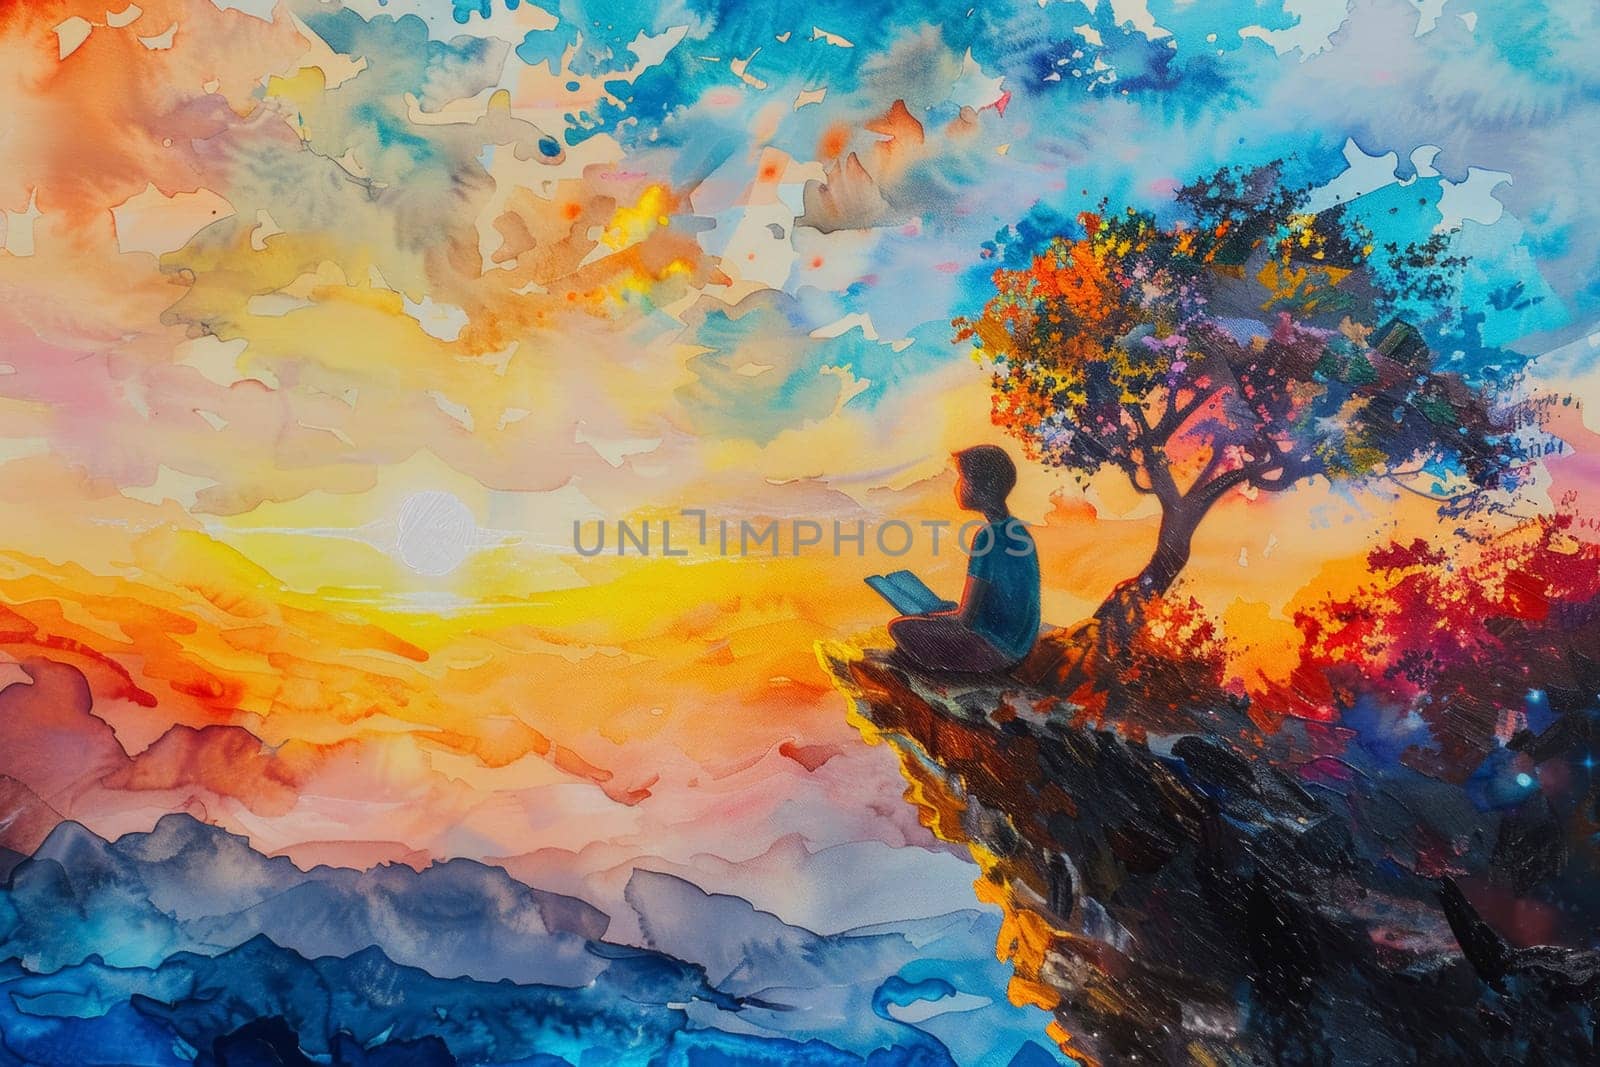 A person sits on a cliff working on a laptop, against a dreamy, watercolor sky. This artwork merges technology and nature, symbolizing the digital nomad lifestyle